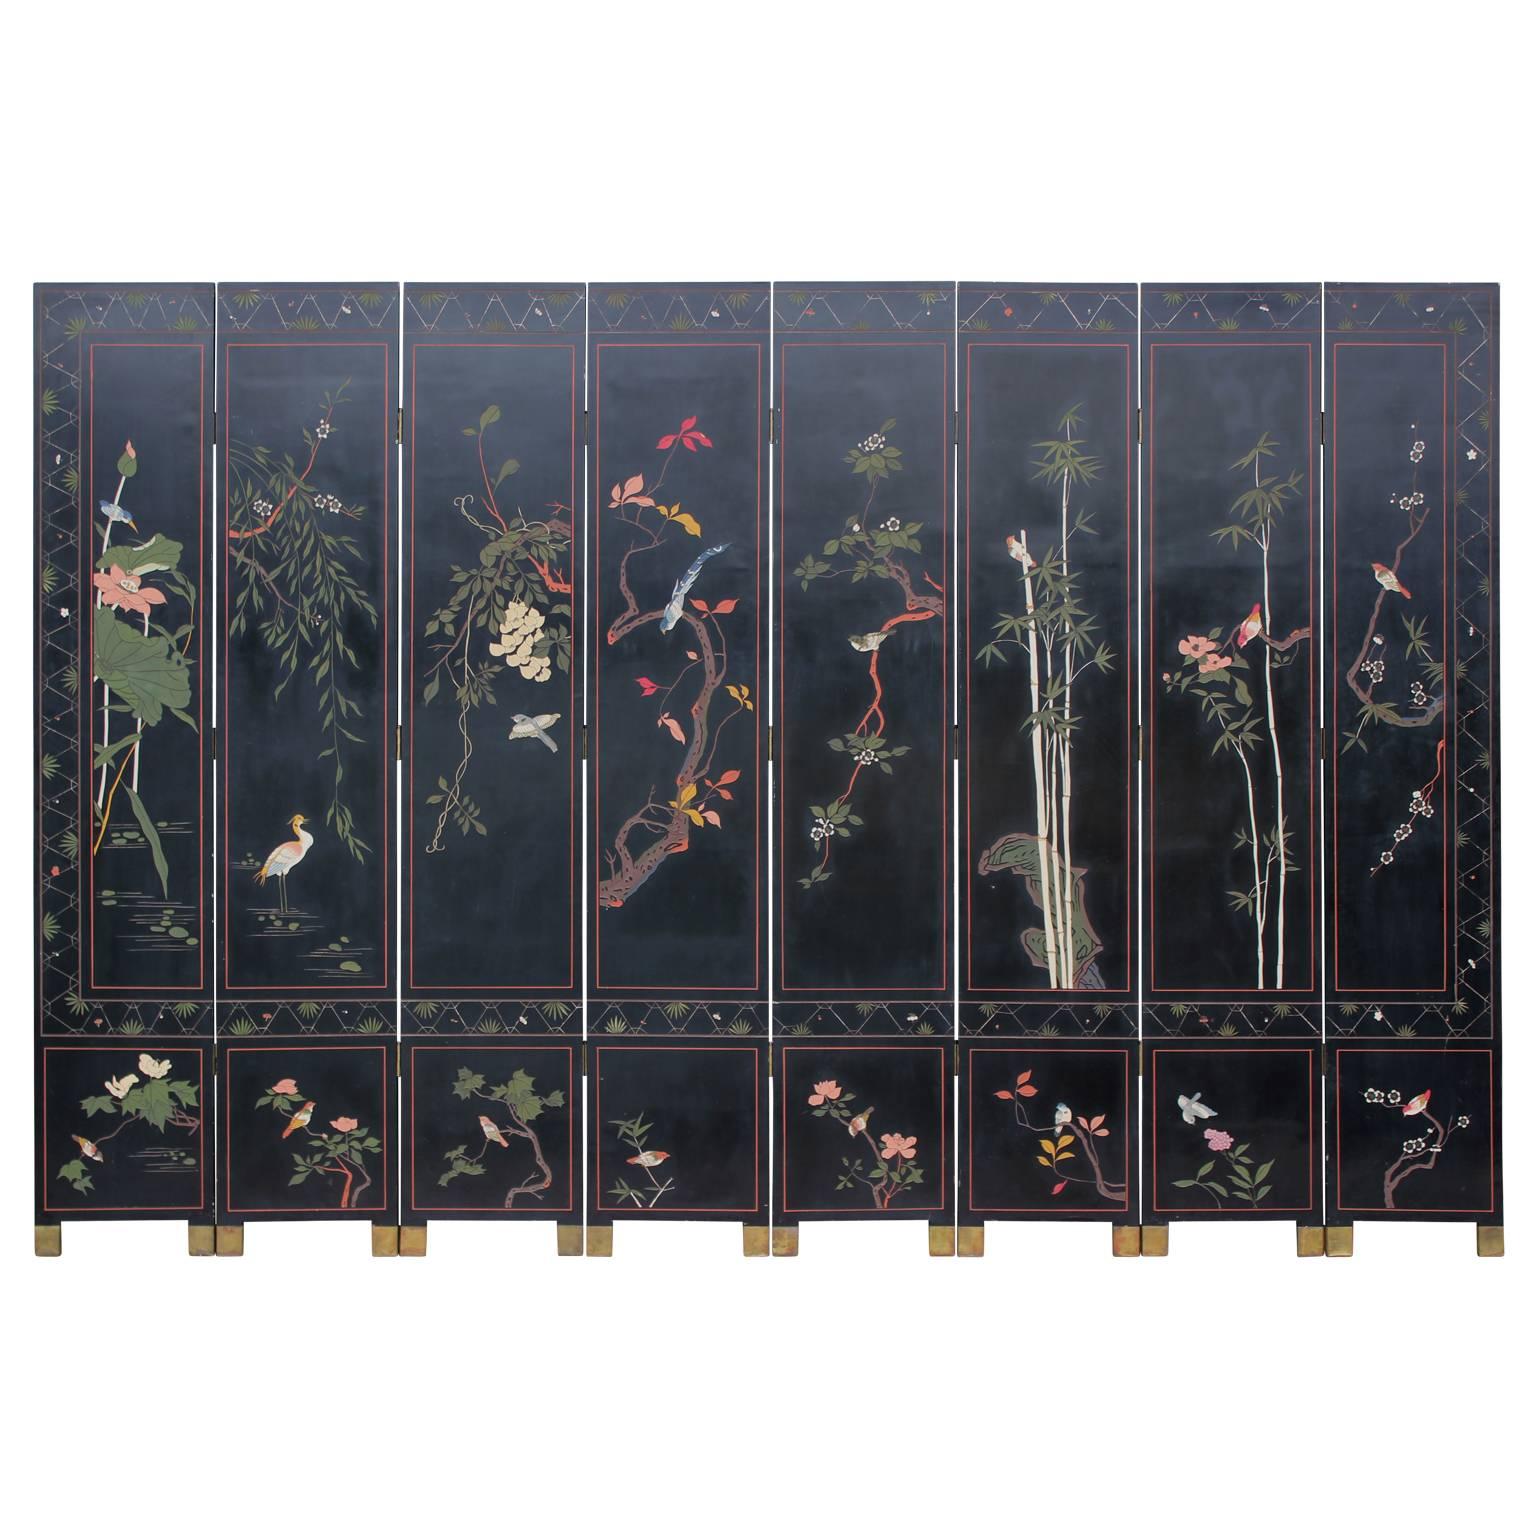 Gorgeous and monumental Chinese coromandel lacquer screen with hand carved Hanzi characters that have also been beautifully painted. Both sides are different from the each other - one displaying birds resting on branches and the other, traditional